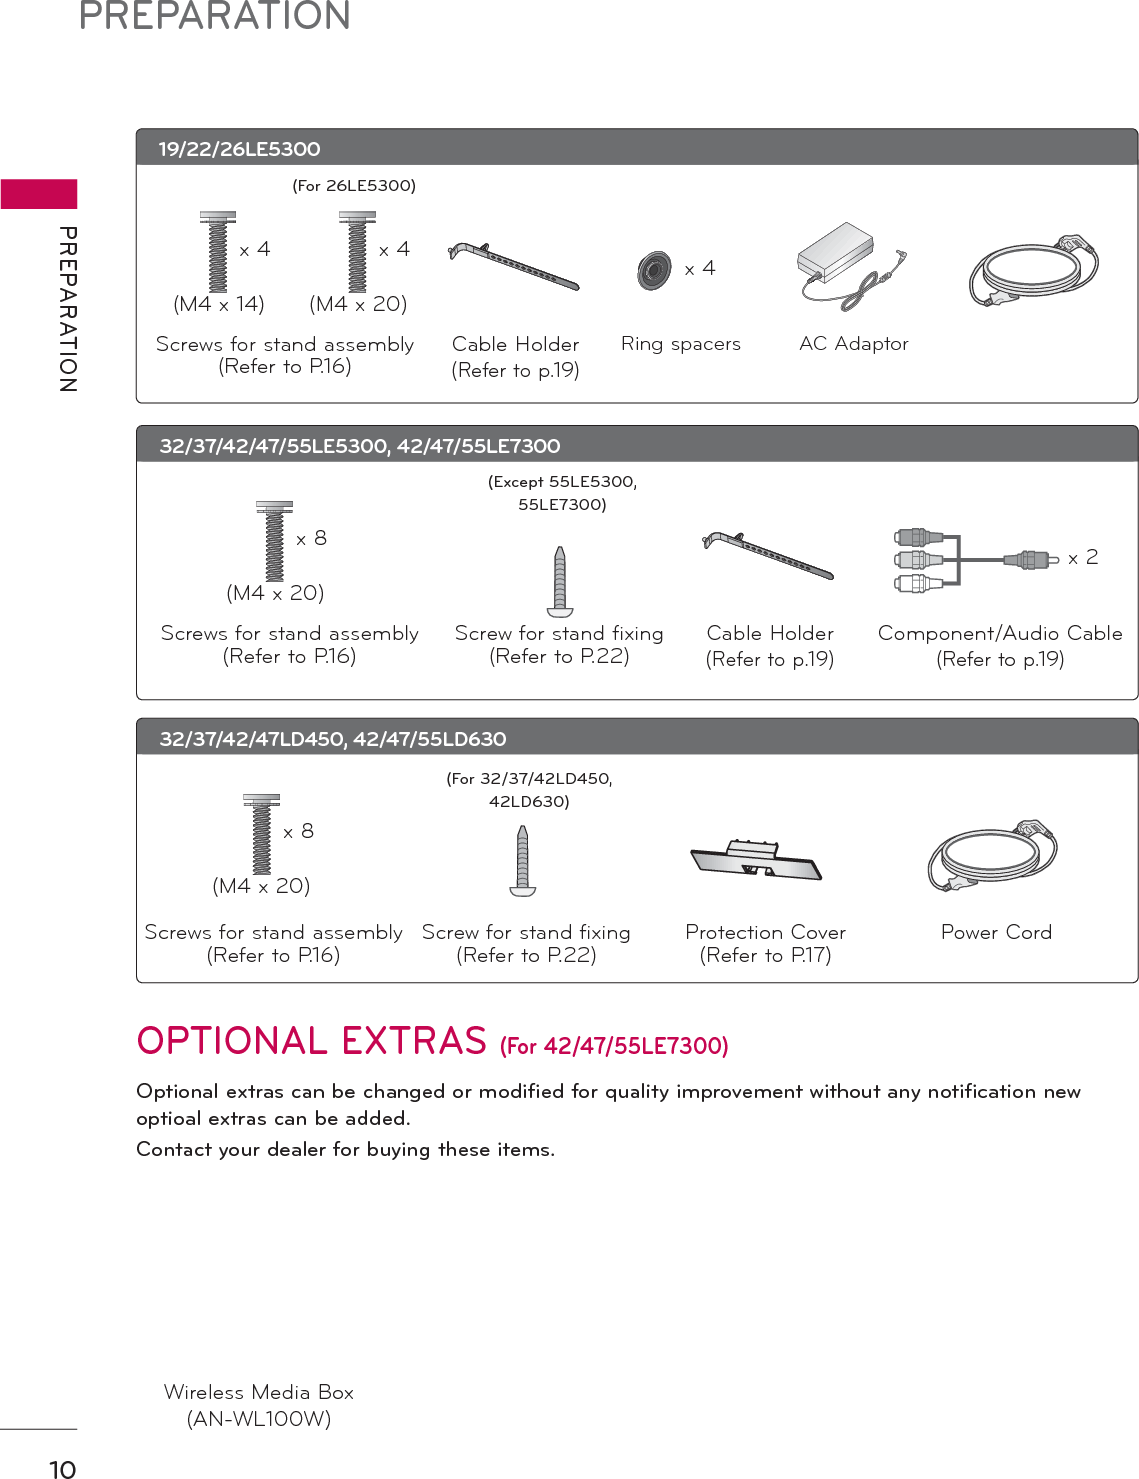 PREPARATIONPREPARATION10OPTIONAL EXTRAS (For 42/47/55LE7300)Optional extras can be changed or modified for quality improvement without any notification new optioal extras can be added.Contact your dealer for buying these items.19/22/26LE5300Cable Holder(Refer to p.19)Wireless Media Box(AN-WL100W)Screws for stand assembly(Refer to P.16)x 4 x 4(M4 x 14) (M4 x 20)AC AdaptorRing spacers(For 26LE5300)32/37/42/47LD450, 42/47/55LD630(M4 x 20)Screws for stand assembly(Refer to P.16)Screw for stand fixing(Refer to P.22)x 8Protection Cover(Refer to P.17)(For 32/37/42LD450, 42LD630)x 432/37/42/47/55LE5300, 42/47/55LE7300Cable Holder(Refer to p.19)Component/Audio Cable(Refer to p.19)Screws for stand assembly(Refer to P.16)x 8 x 2(M4 x 20)Screw for stand fixing(Refer to P.22)Power Cord(Except 55LE5300, 55LE7300)